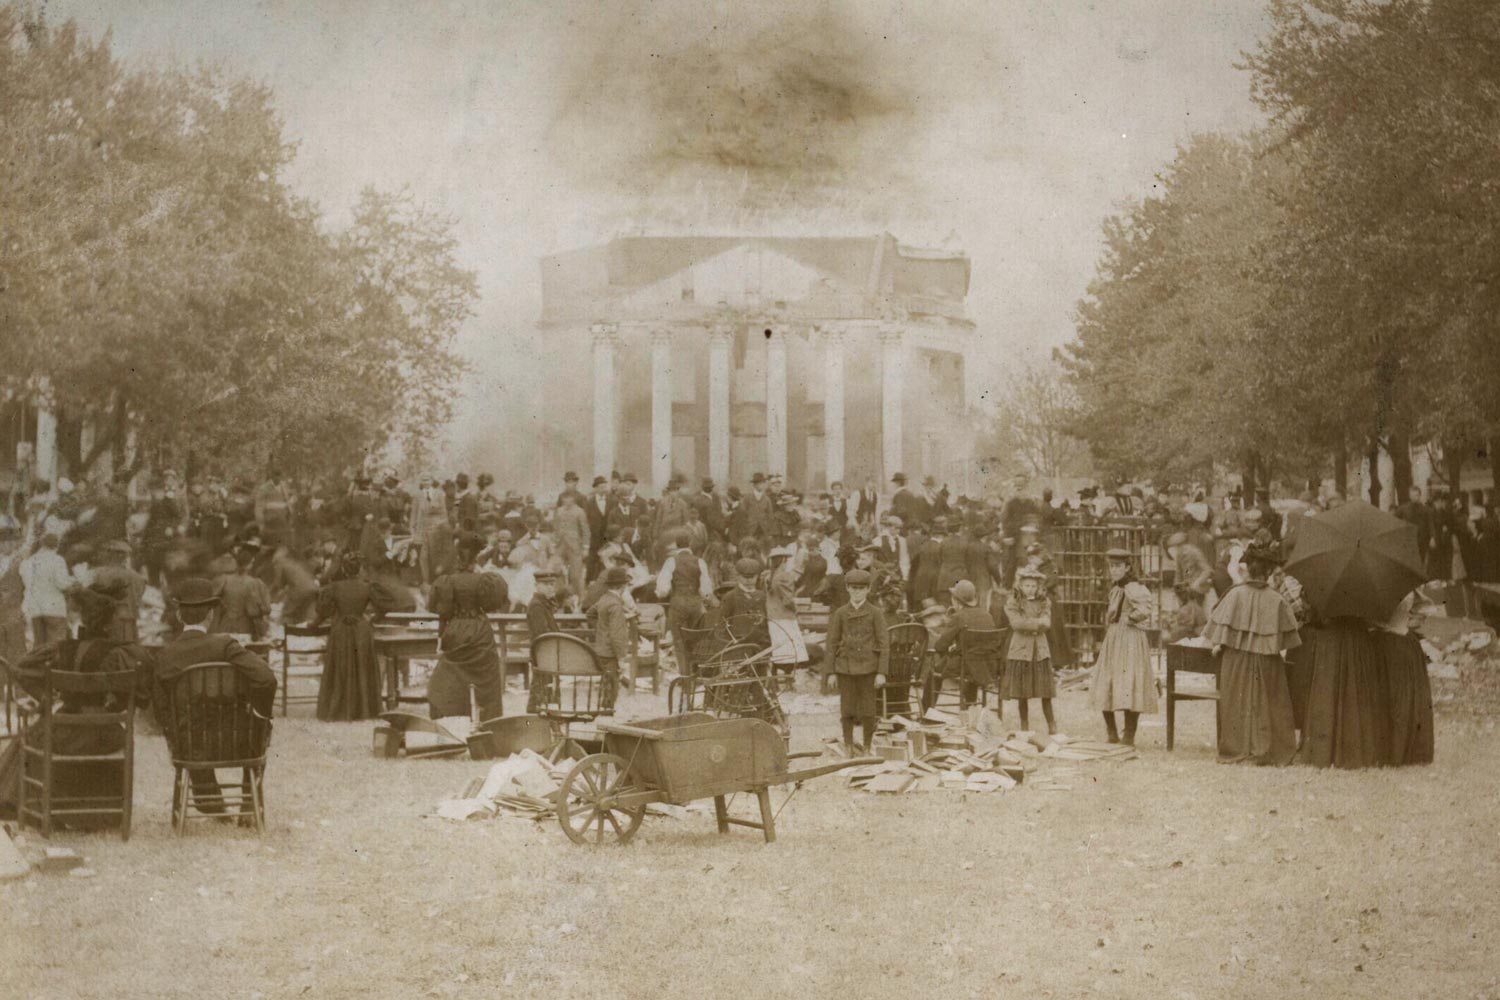 Black and white image of the Rotunda on fire and people gathered on the Lawn